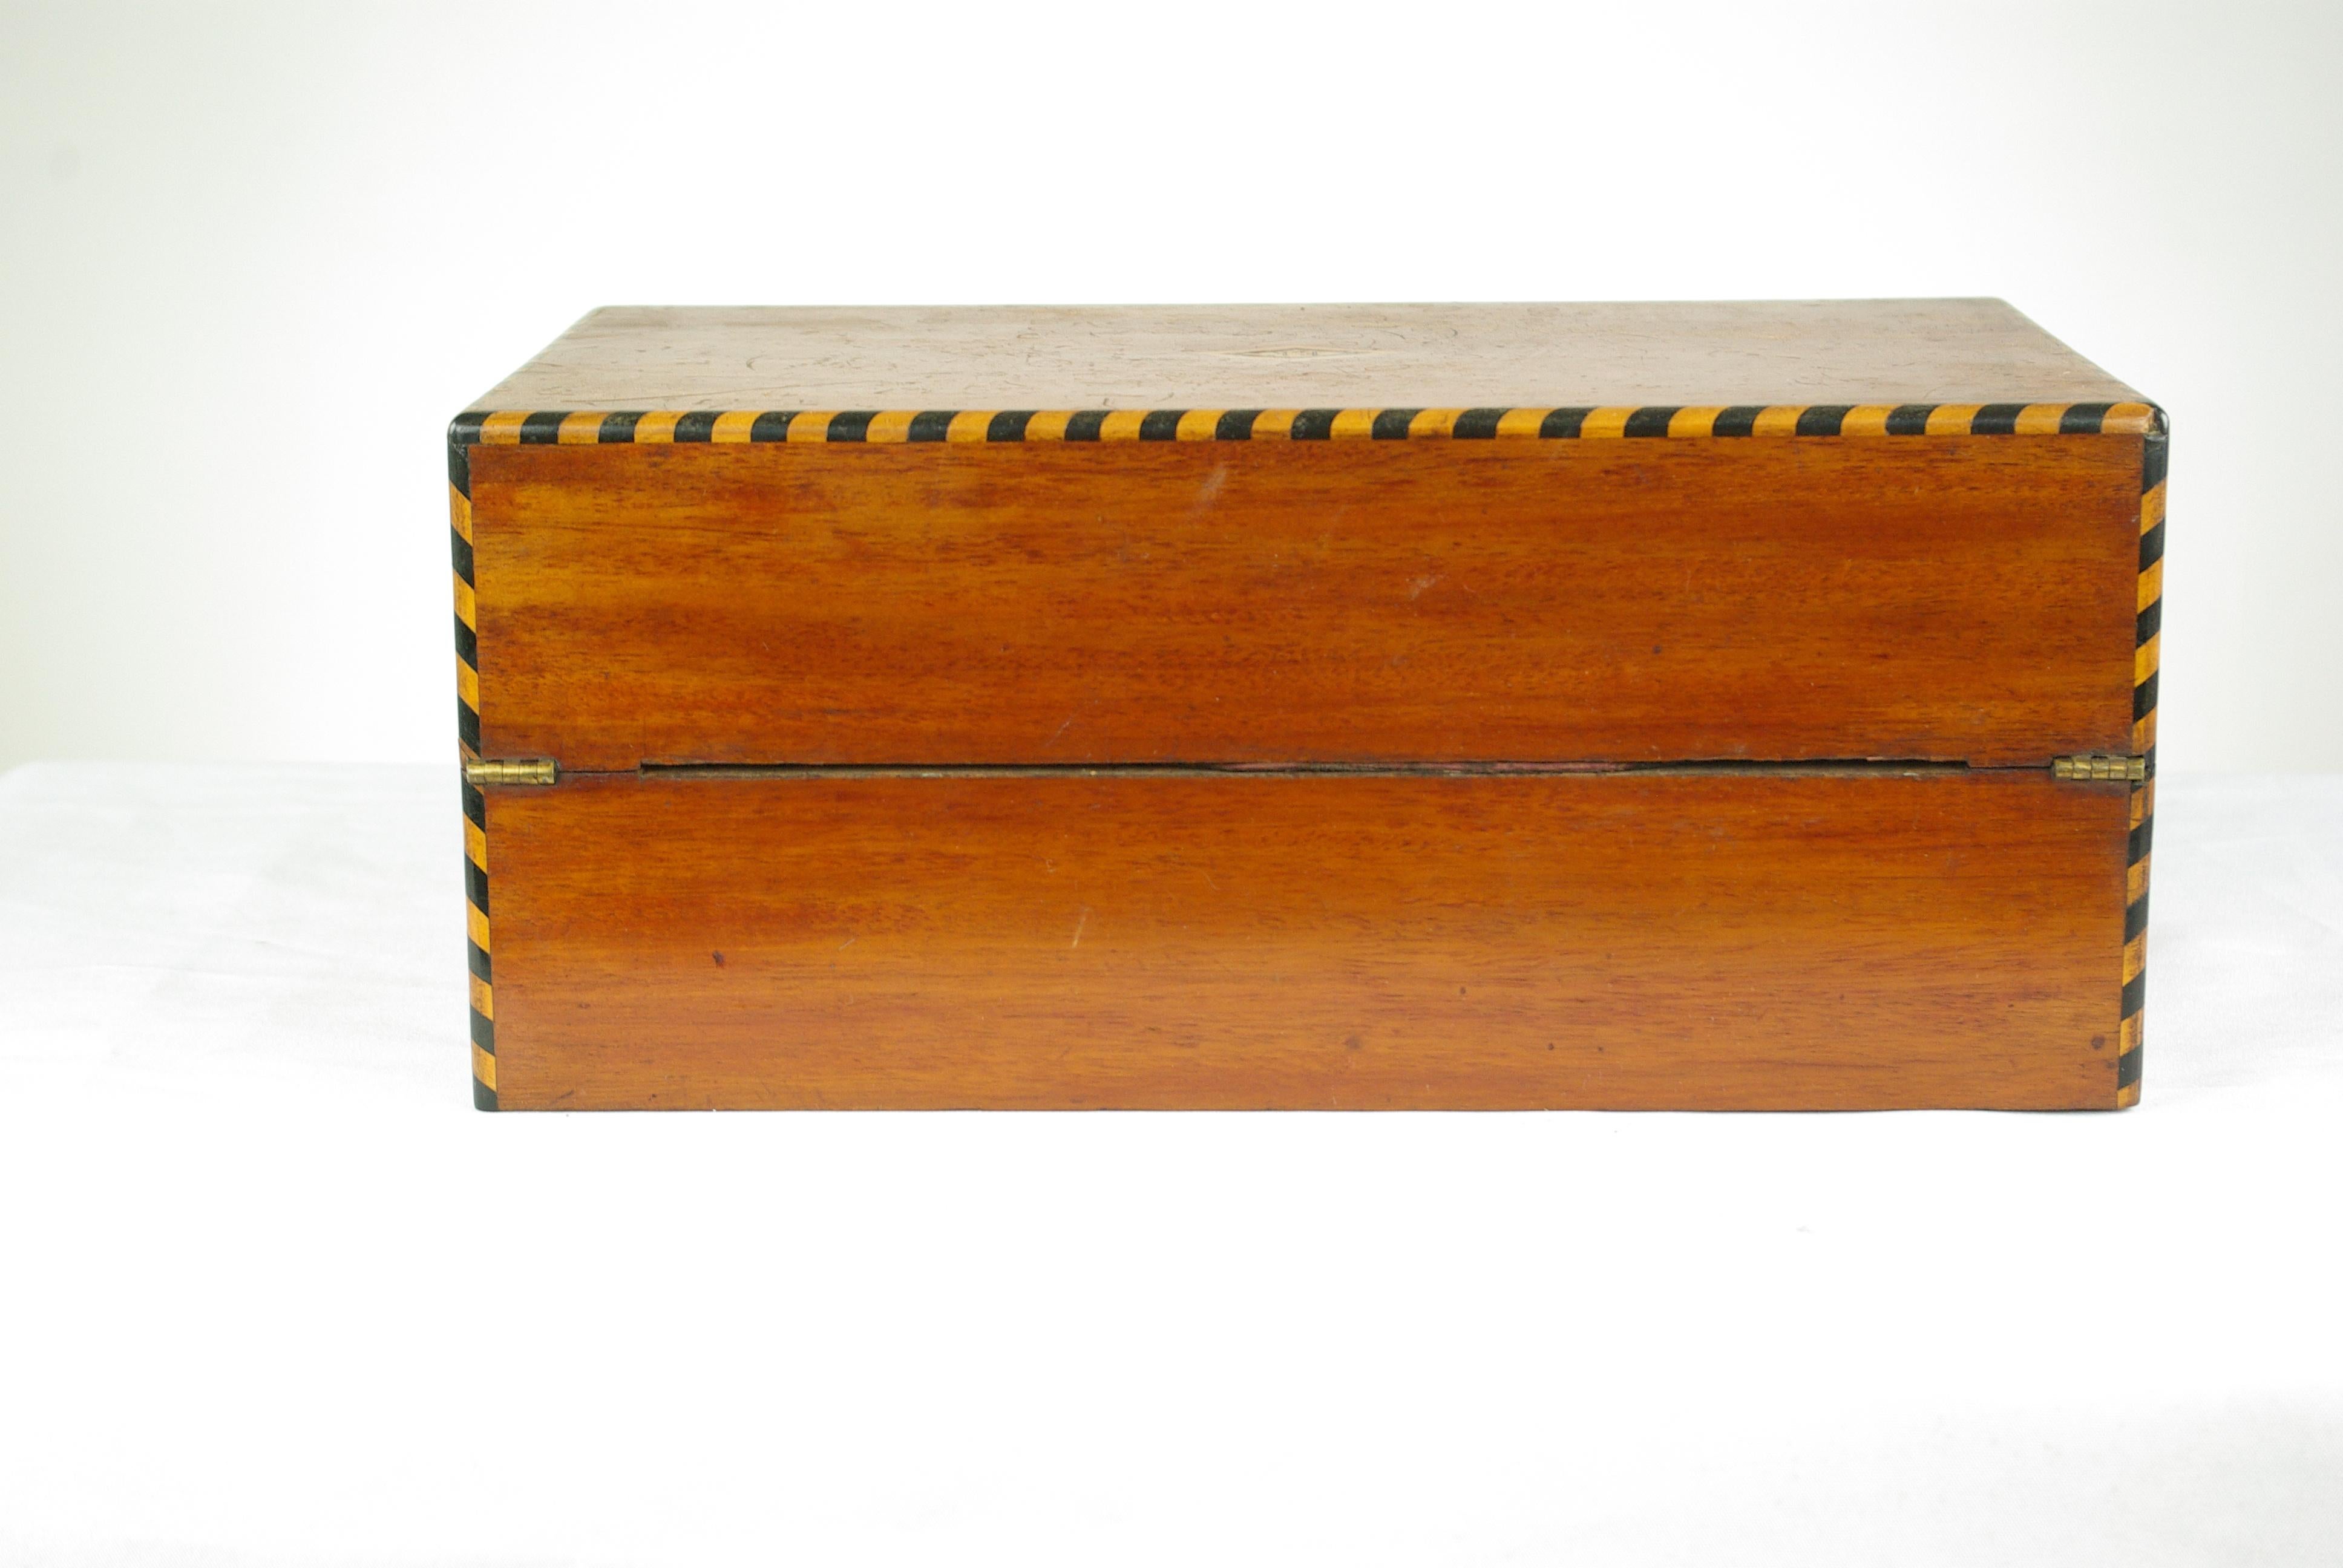 Antique Writing Slope, Writing Box, Antique Lap Desk, Walnut, Scotland 1880, Antique Furniture, B1082

Scotland 1880
Inlaid Top Perimeter
Inlaid Monogram to Top
Sing Glass Inkwell (one Missing)
Top Slope Opens to Reveal Two Concealed Drawers behind